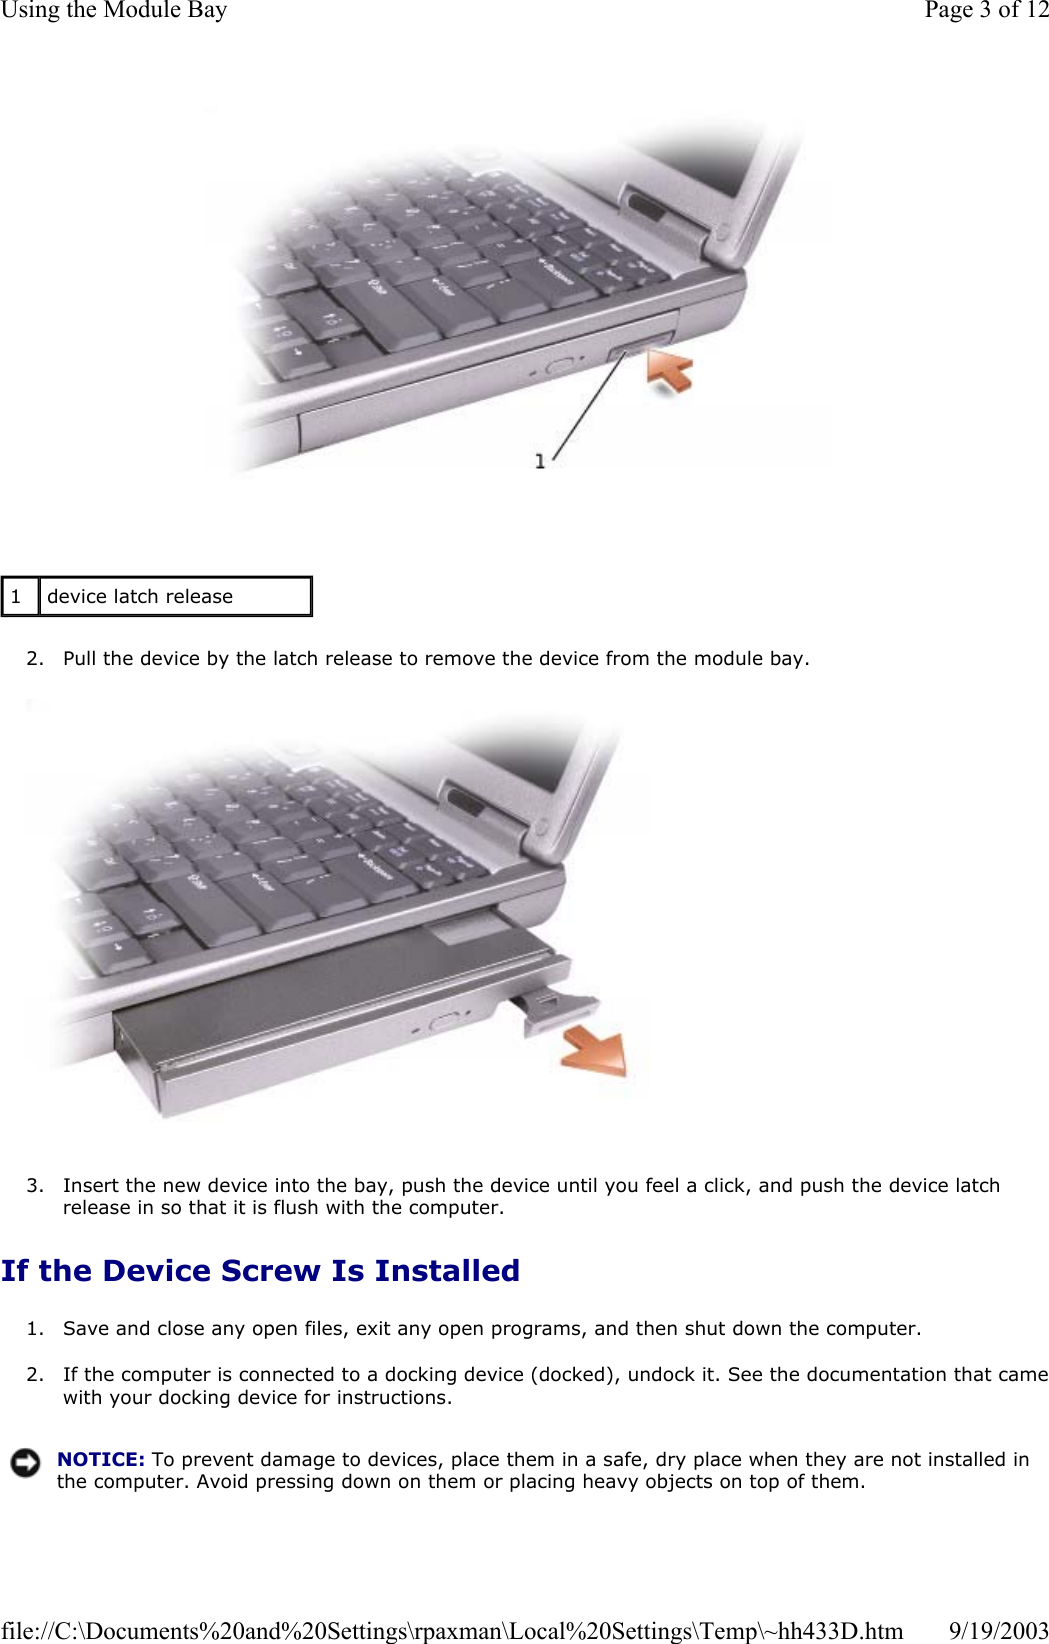   2. Pull the device by the latch release to remove the device from the module bay.    3. Insert the new device into the bay, push the device until you feel a click, and push the device latch release in so that it is flush with the computer.  If the Device Screw Is Installed 1. Save and close any open files, exit any open programs, and then shut down the computer.  2. If the computer is connected to a docking device (docked), undock it. See the documentation that camewith your docking device for instructions.  1  device latch release NOTICE: To prevent damage to devices, place them in a safe, dry place when they are not installed in the computer. Avoid pressing down on them or placing heavy objects on top of them.Page 3 of 12Using the Module Bay9/19/2003file://C:\Documents%20and%20Settings\rpaxman\Local%20Settings\Temp\~hh433D.htm